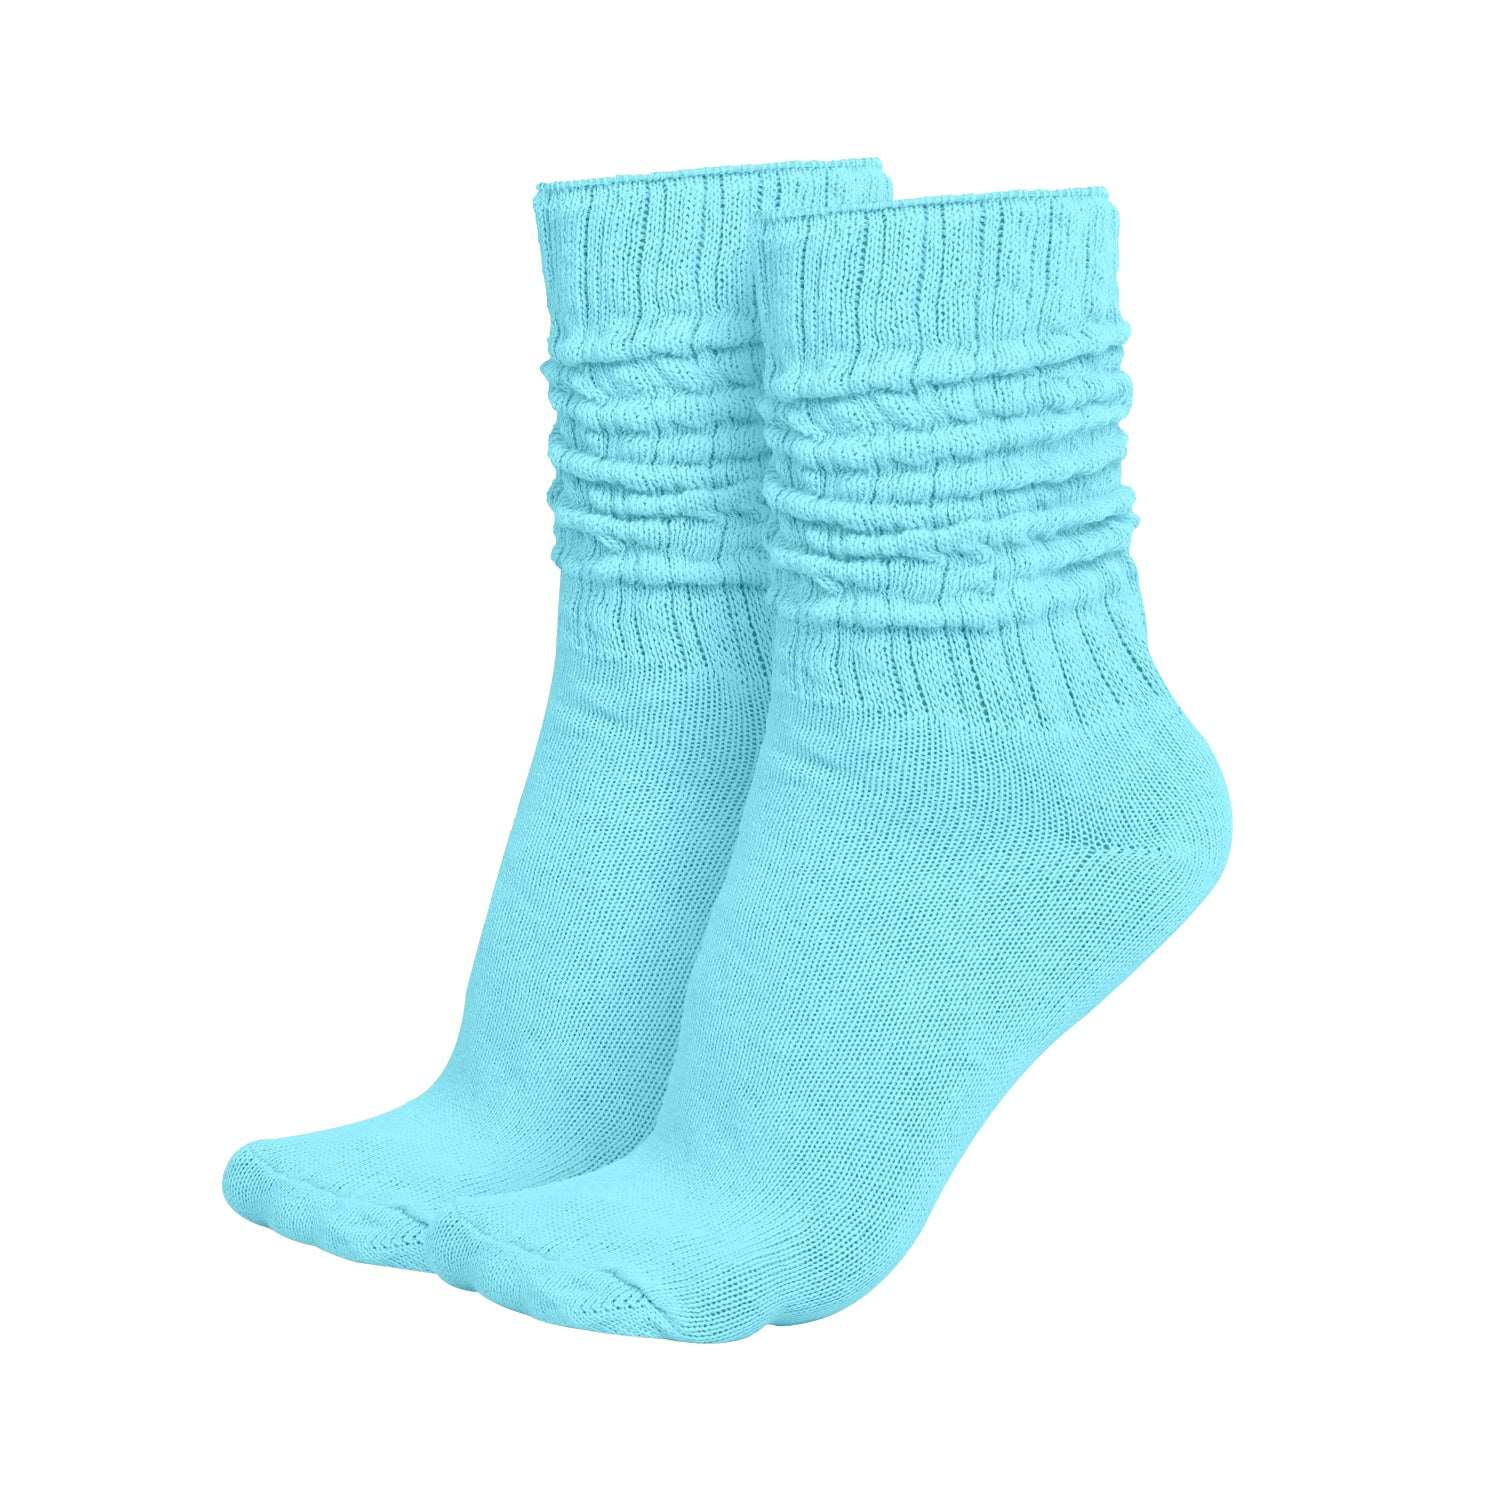 MDR Lightweight Cotton Slouch Socks For Women and Men 1 Pair Made in USA Size 9 to 11 (Light Blue)